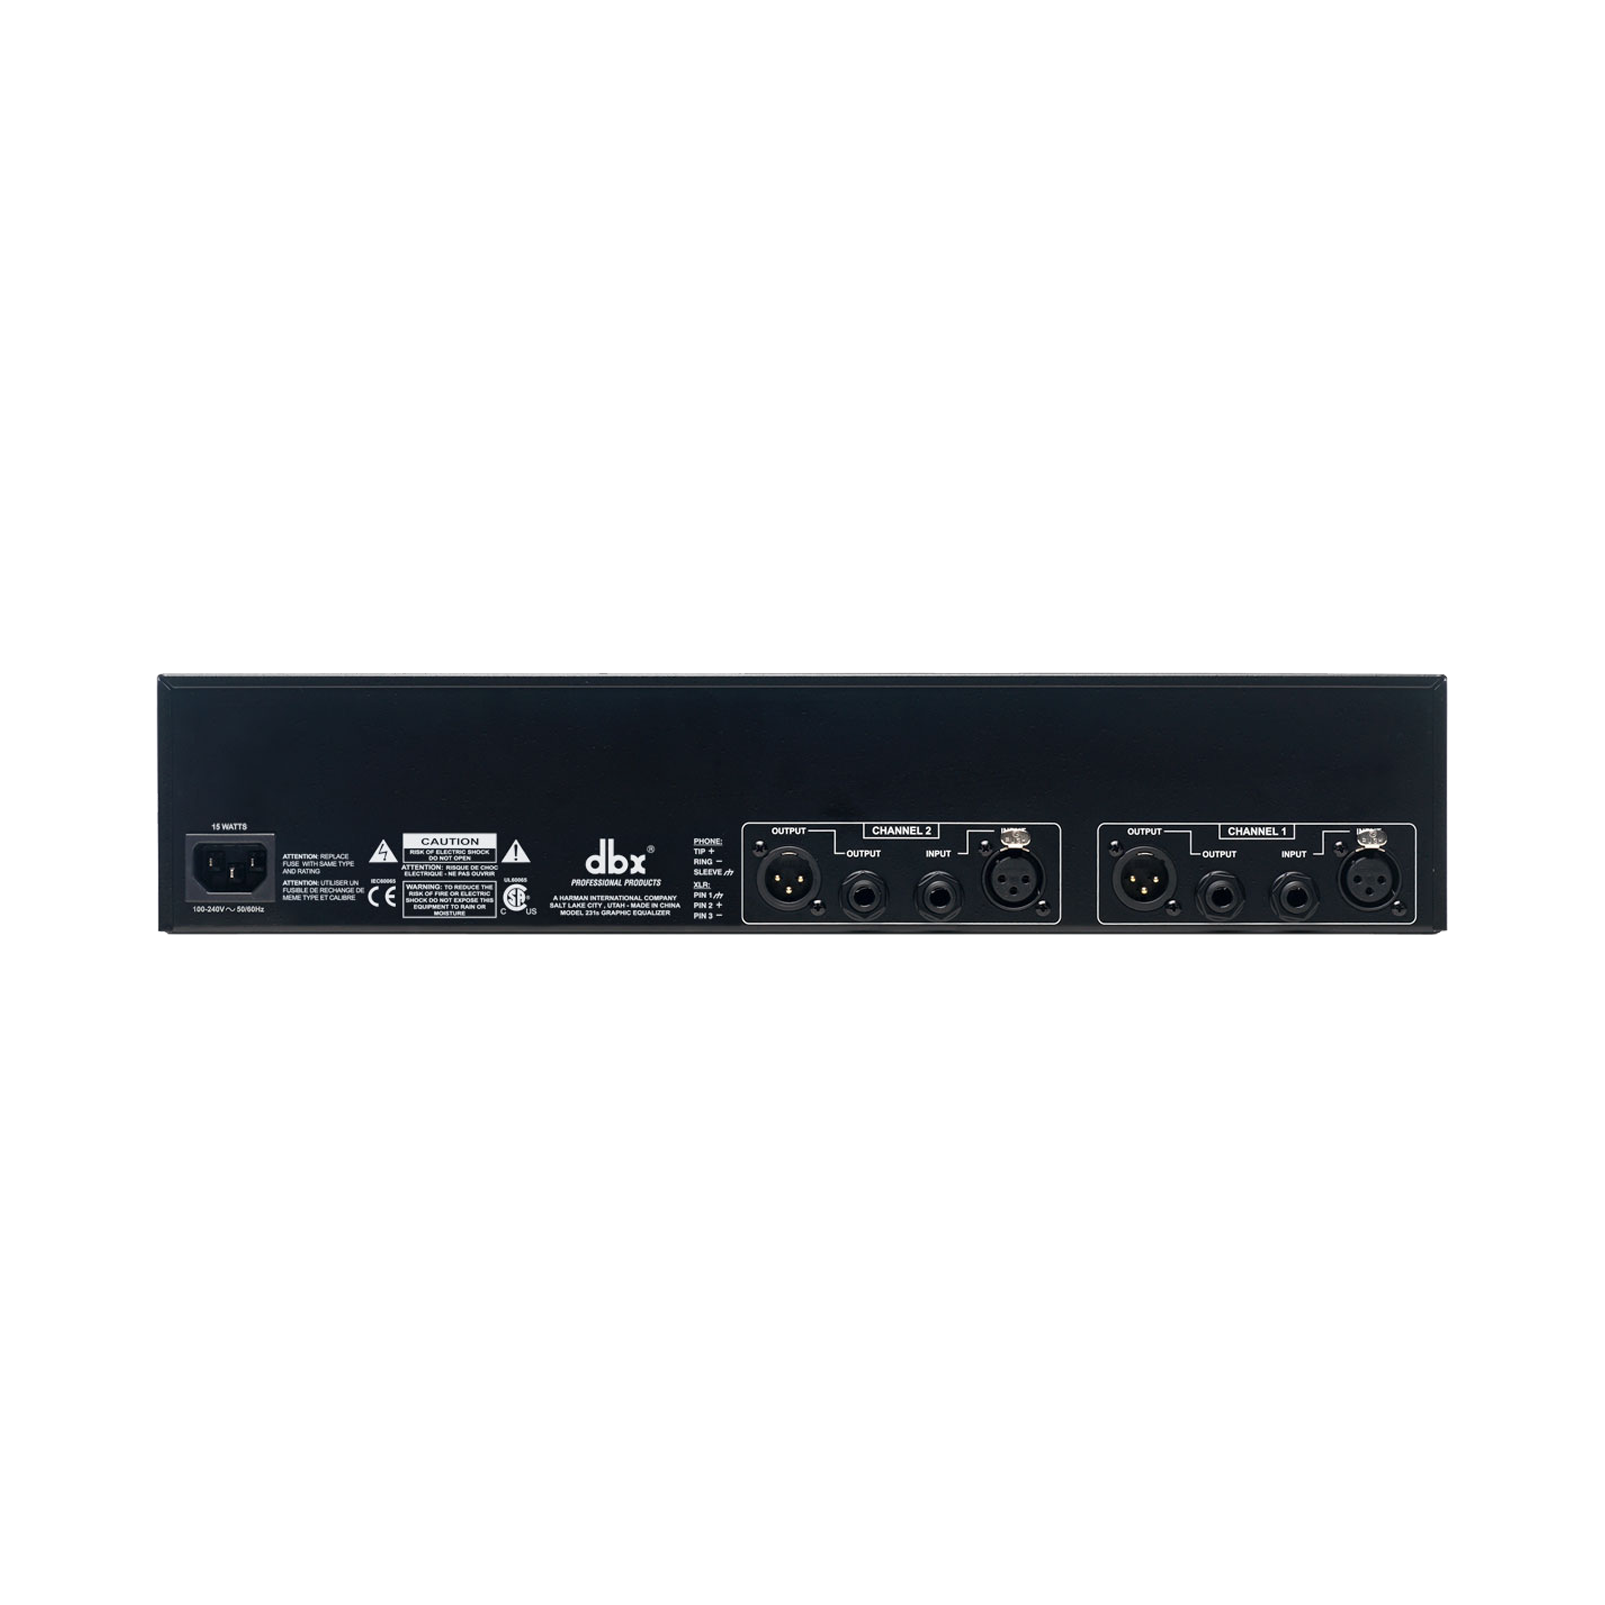 231s - White - Dual channel 31-band equalizer - Back